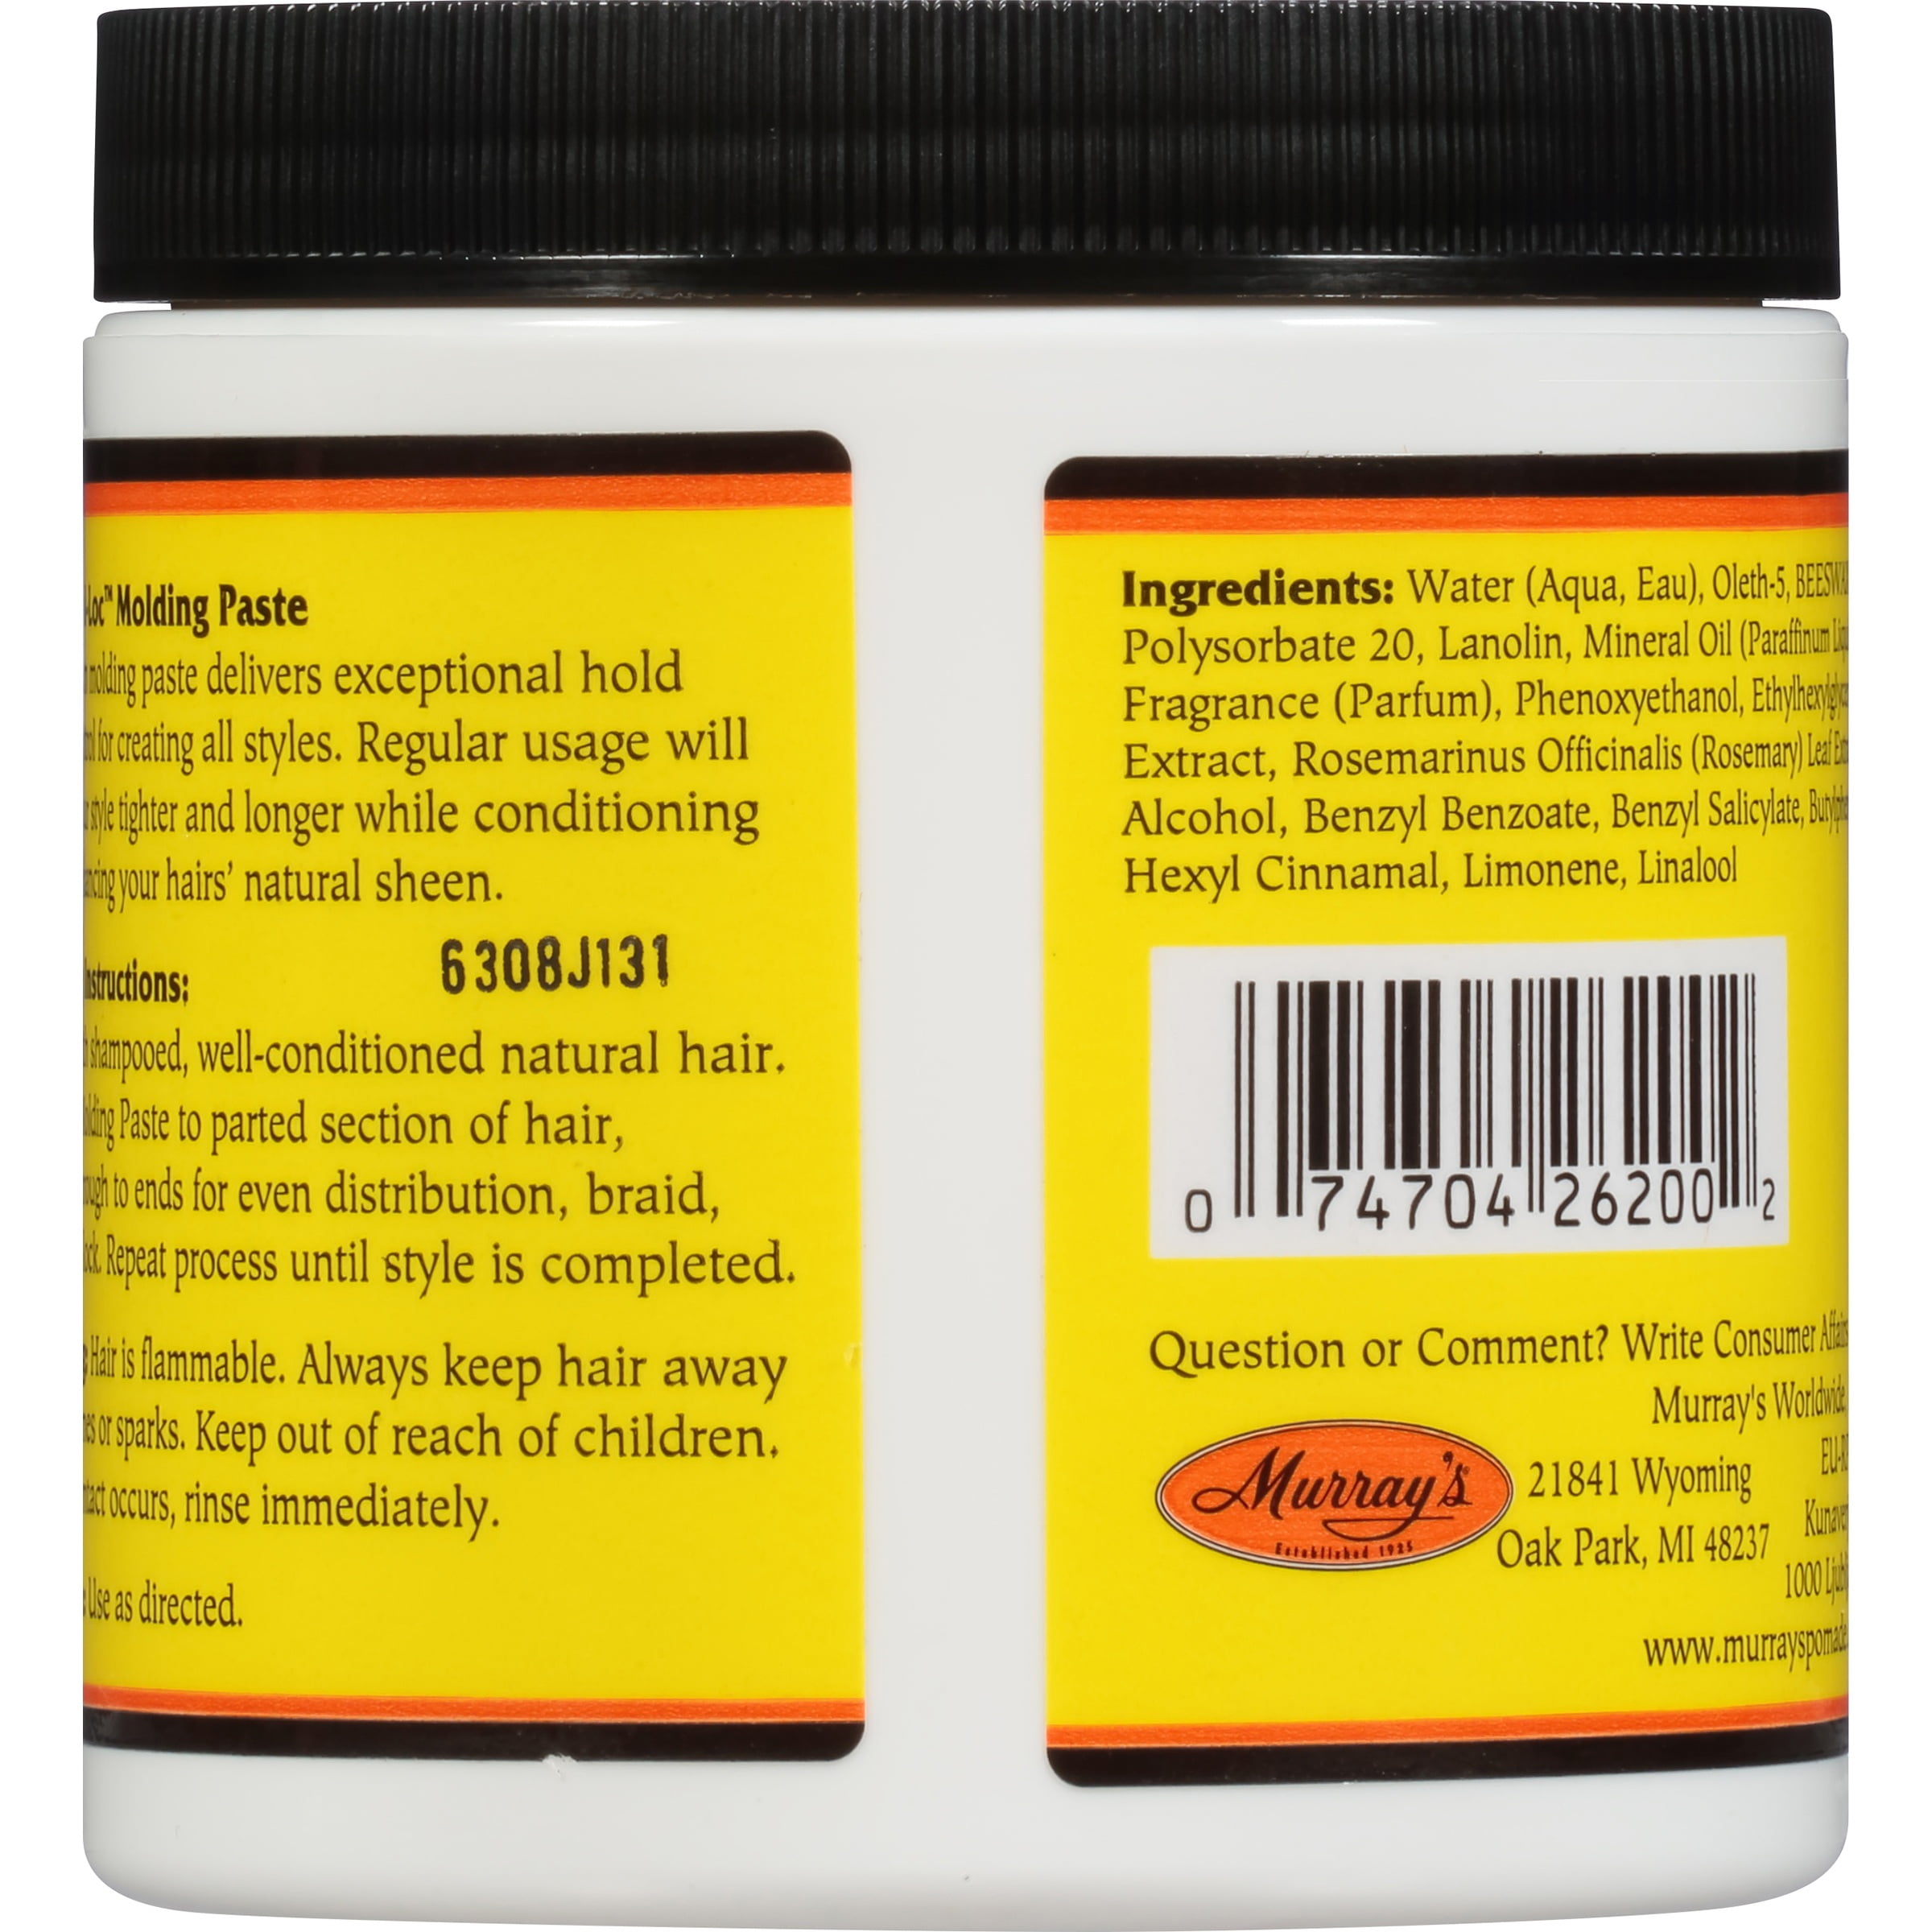 Murray's Beeswax Natural-Loc Molding Paste - 6 oz (171 g)